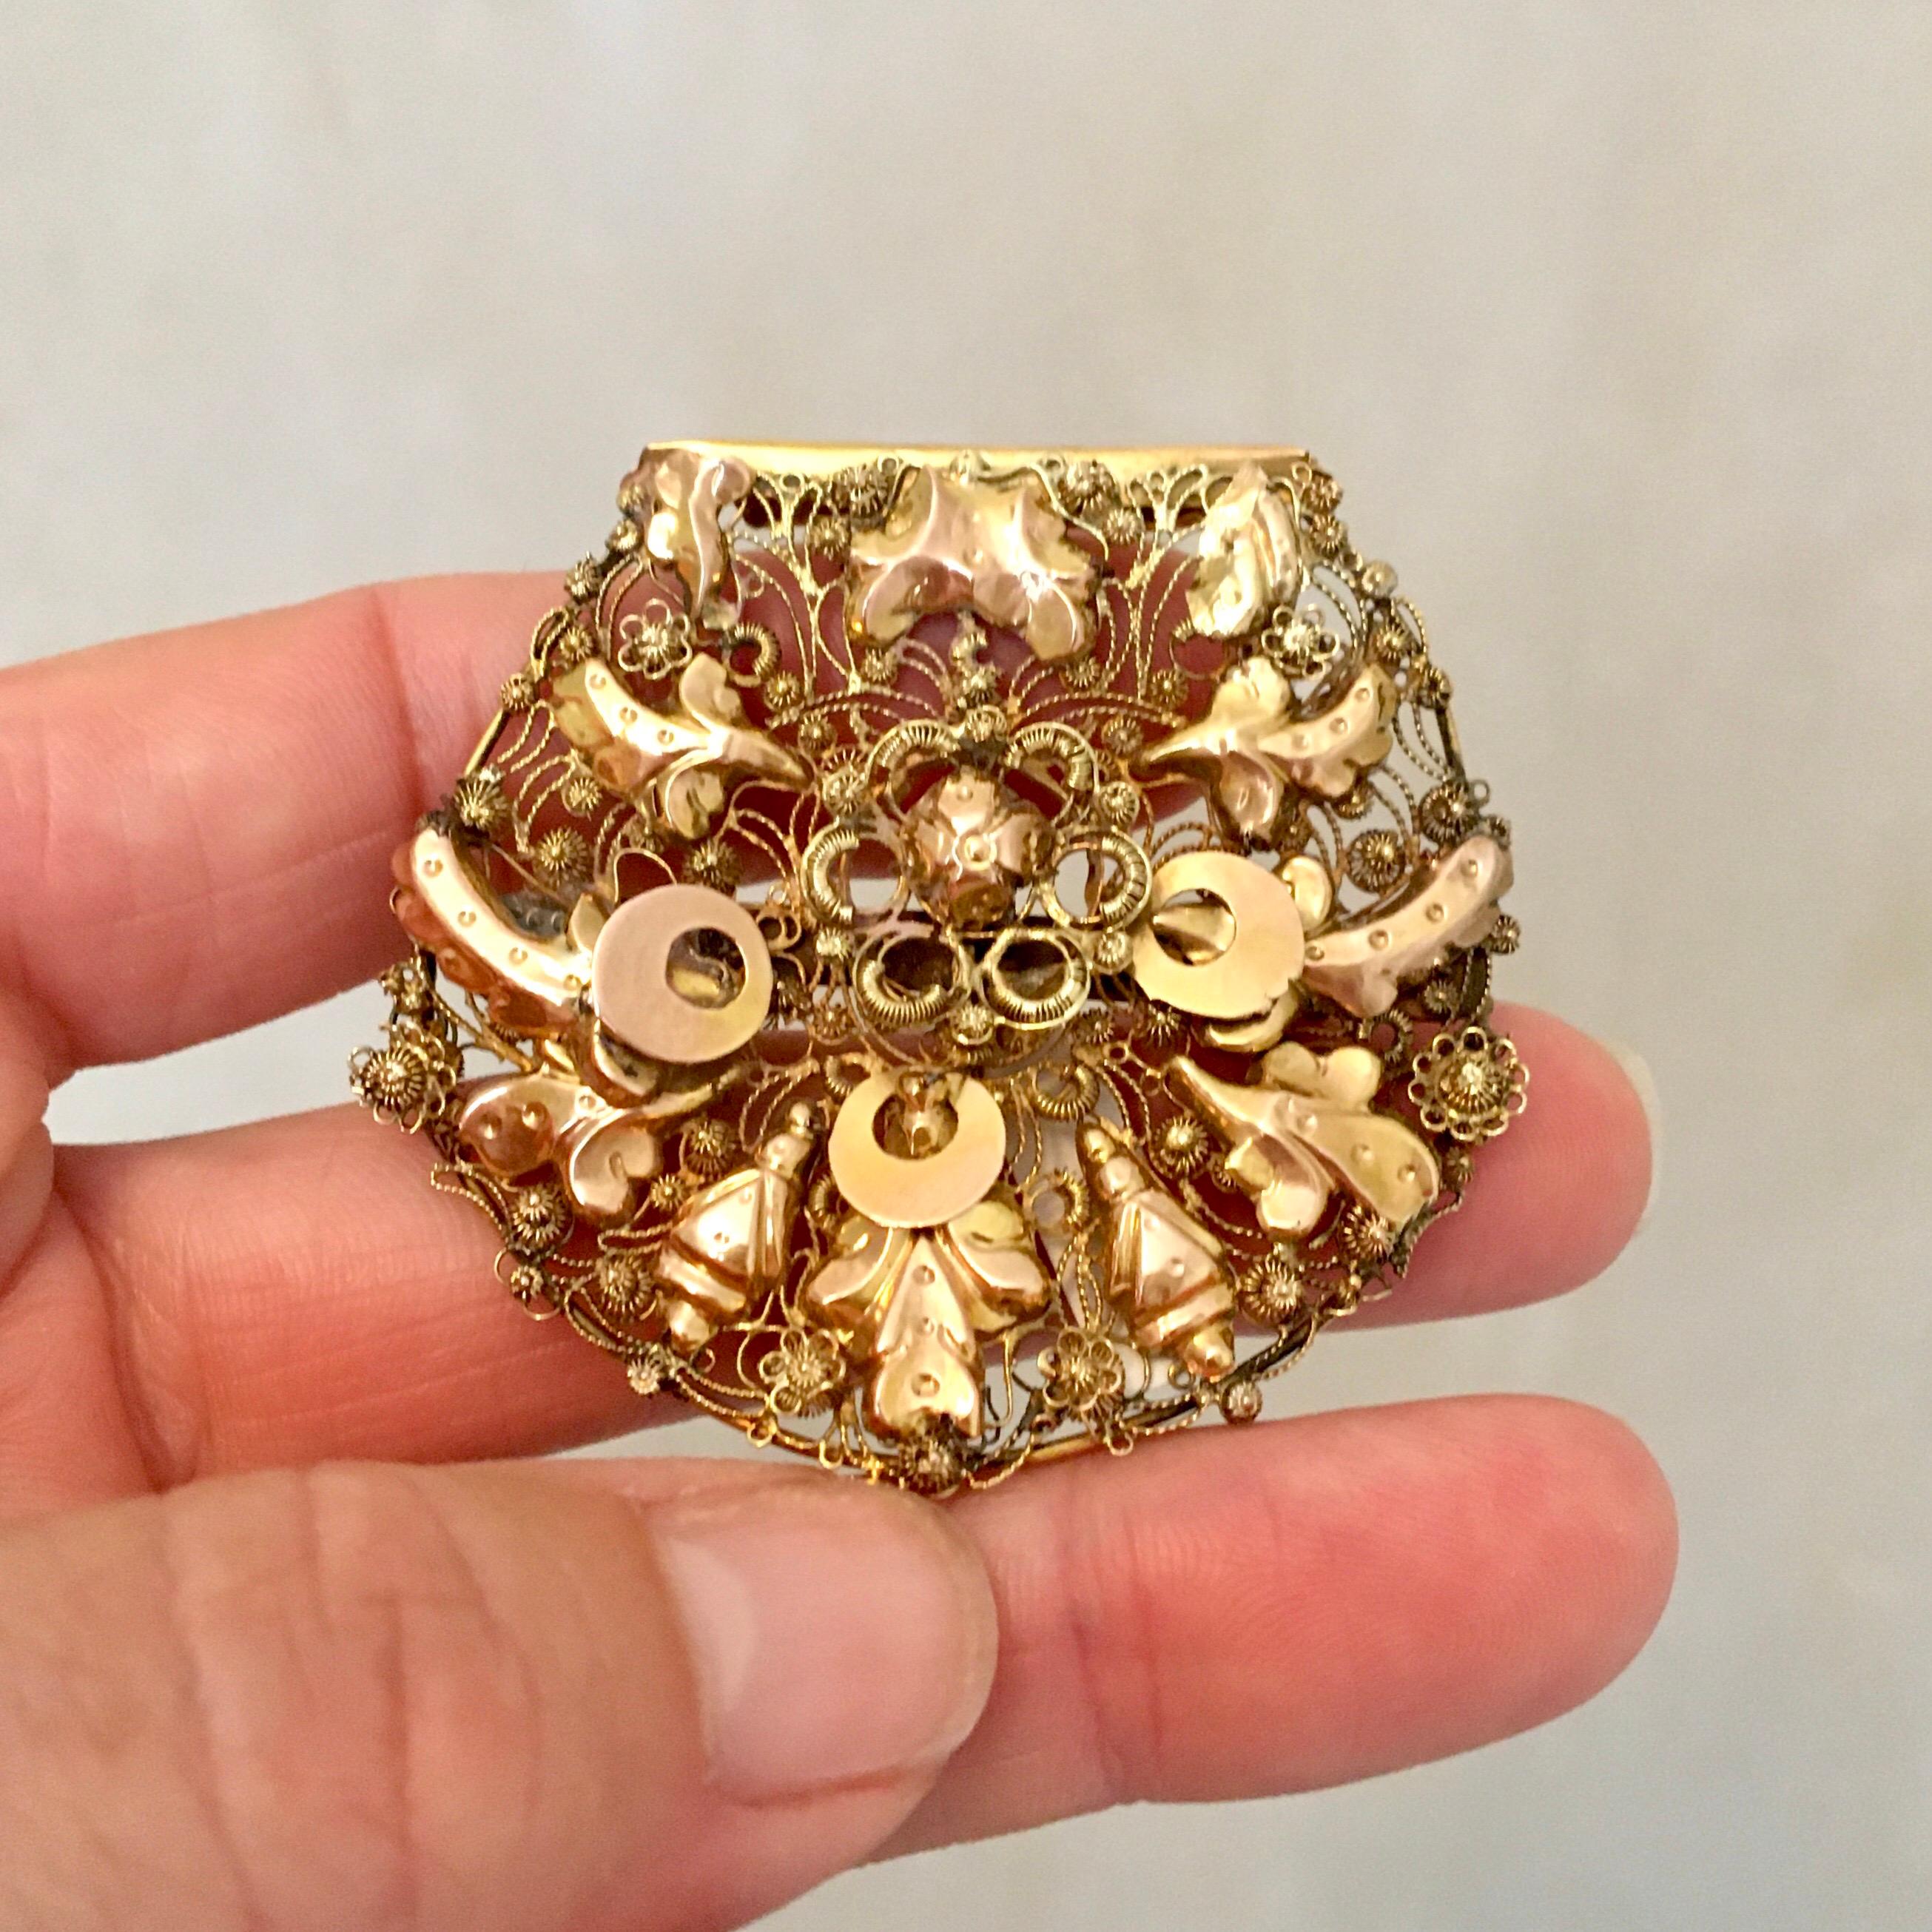 An antique 19th century 14 karat gold brooch created with fine filigree and cannetille work. The brooch is beautifully made, it almost gives the impression of lace or fine embroidery. These types of ornaments were part of the Dutch ear iron. The ear